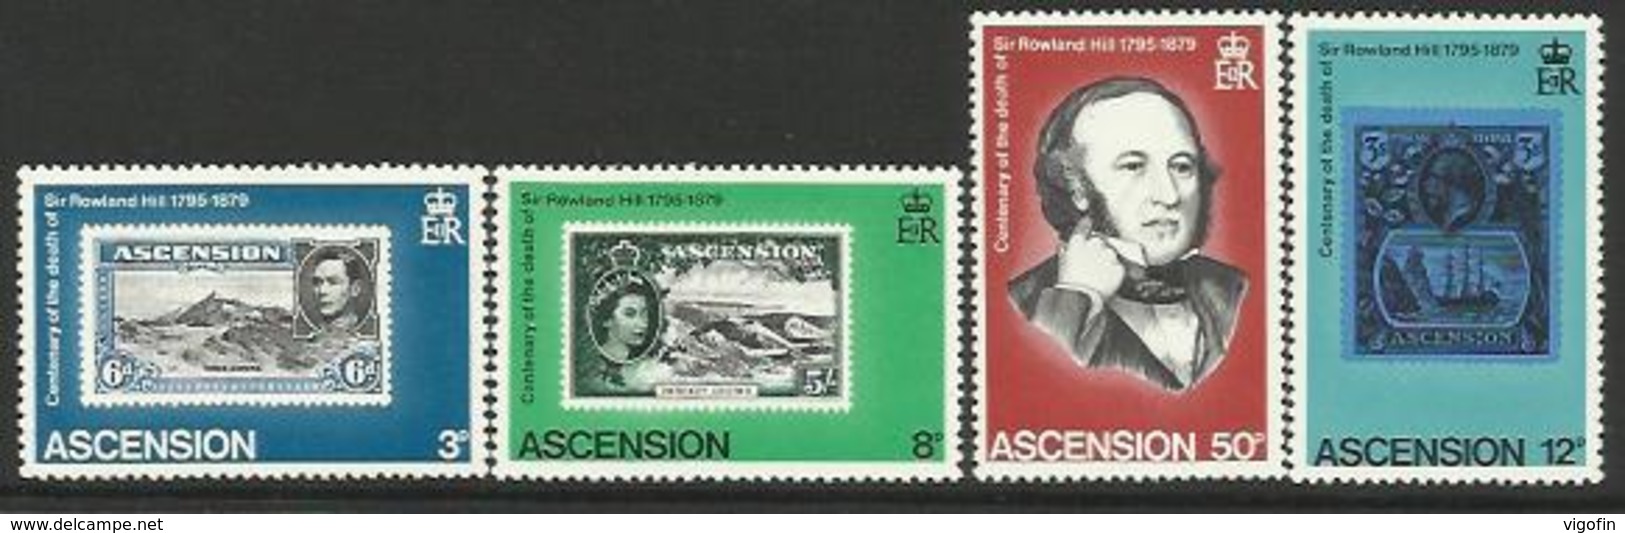 ASC 1979 FAMOUSE PERSONS, ASCENSION , 1 X 4v, MNH - Rowland Hill